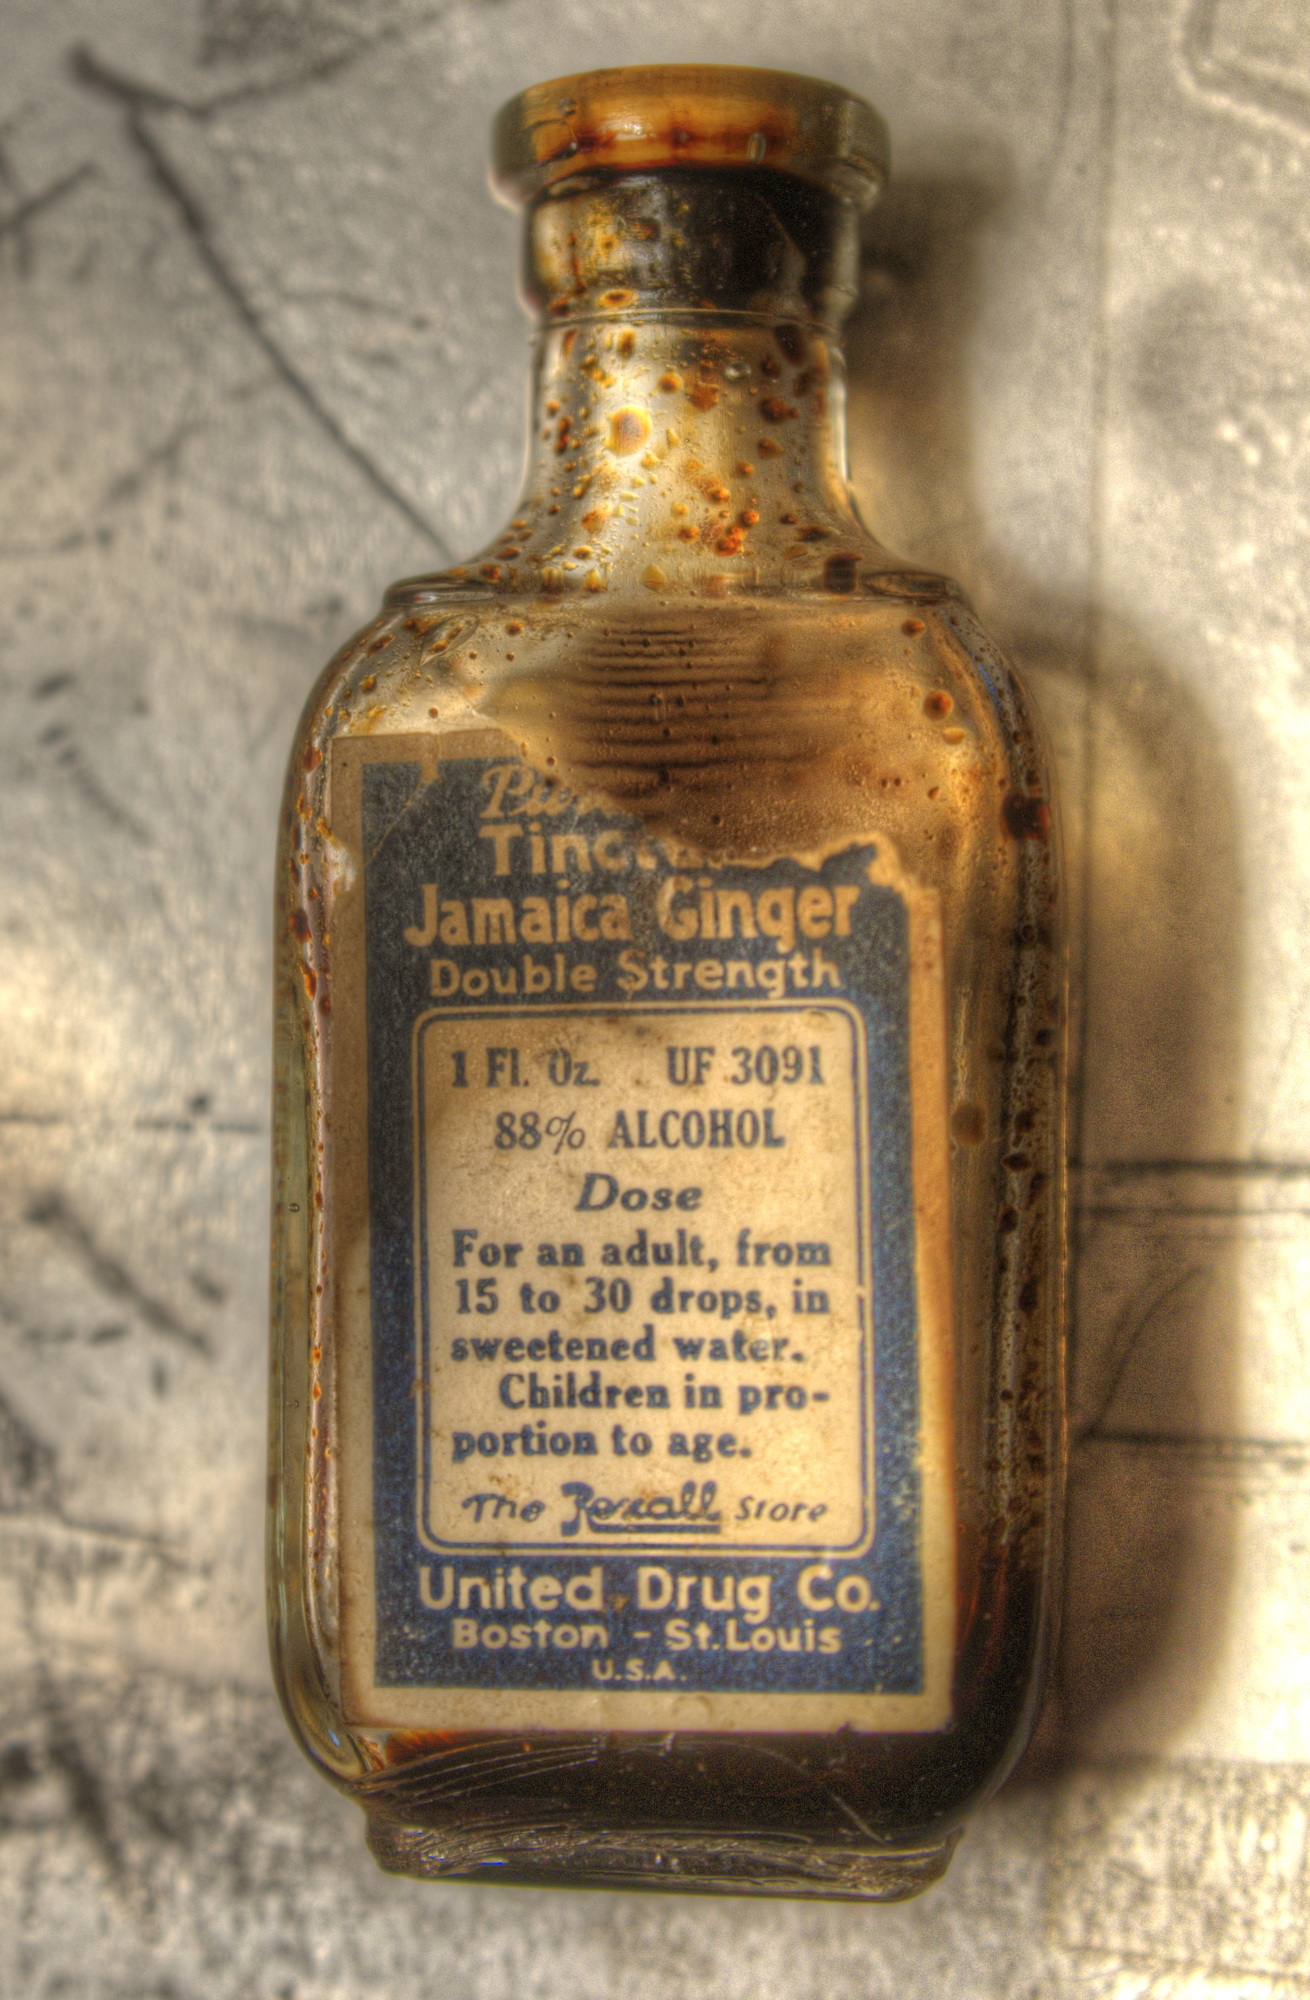 very old glass bottle with cork stopper. Front label is blue and whiteand a small portion of the upper right hand corner of the label is torn away. But the labeling is still there and reads, "Jamaica Ginger Double STrength. 1 Fluid oune, 88% alcohol. Dose for an adult, from 15 to 30 drops, in sweetened water. Children in proportion to age. The Rexall Store. United Drug Co.l Boston - St. Louis U. S. A. The glass is clear and dark reddish-brown droplets and residue are visible inside the bottle.and reads